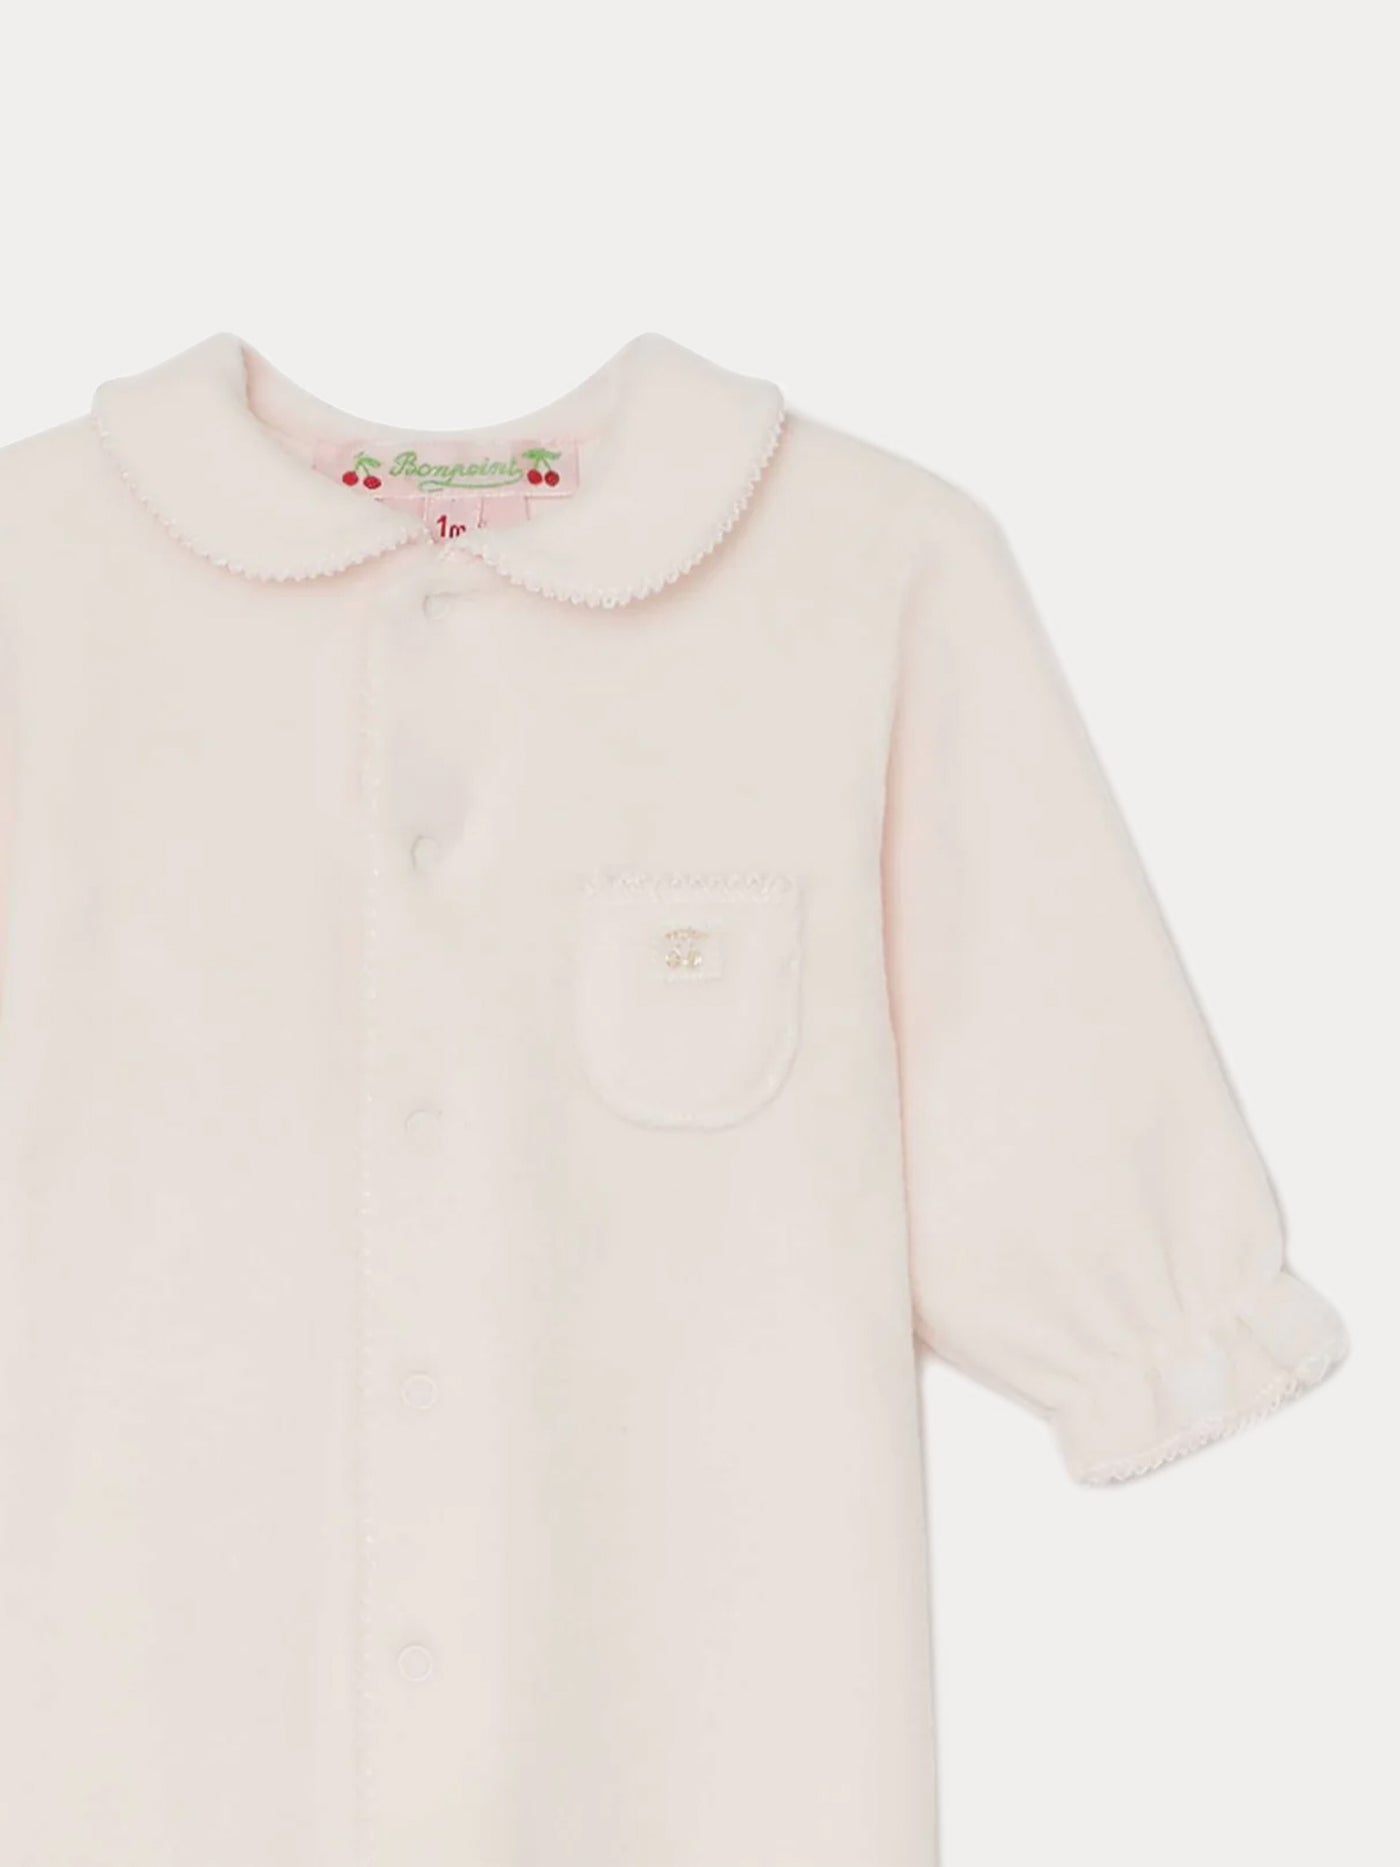 Baby round Neck Sleepsuit pale pink